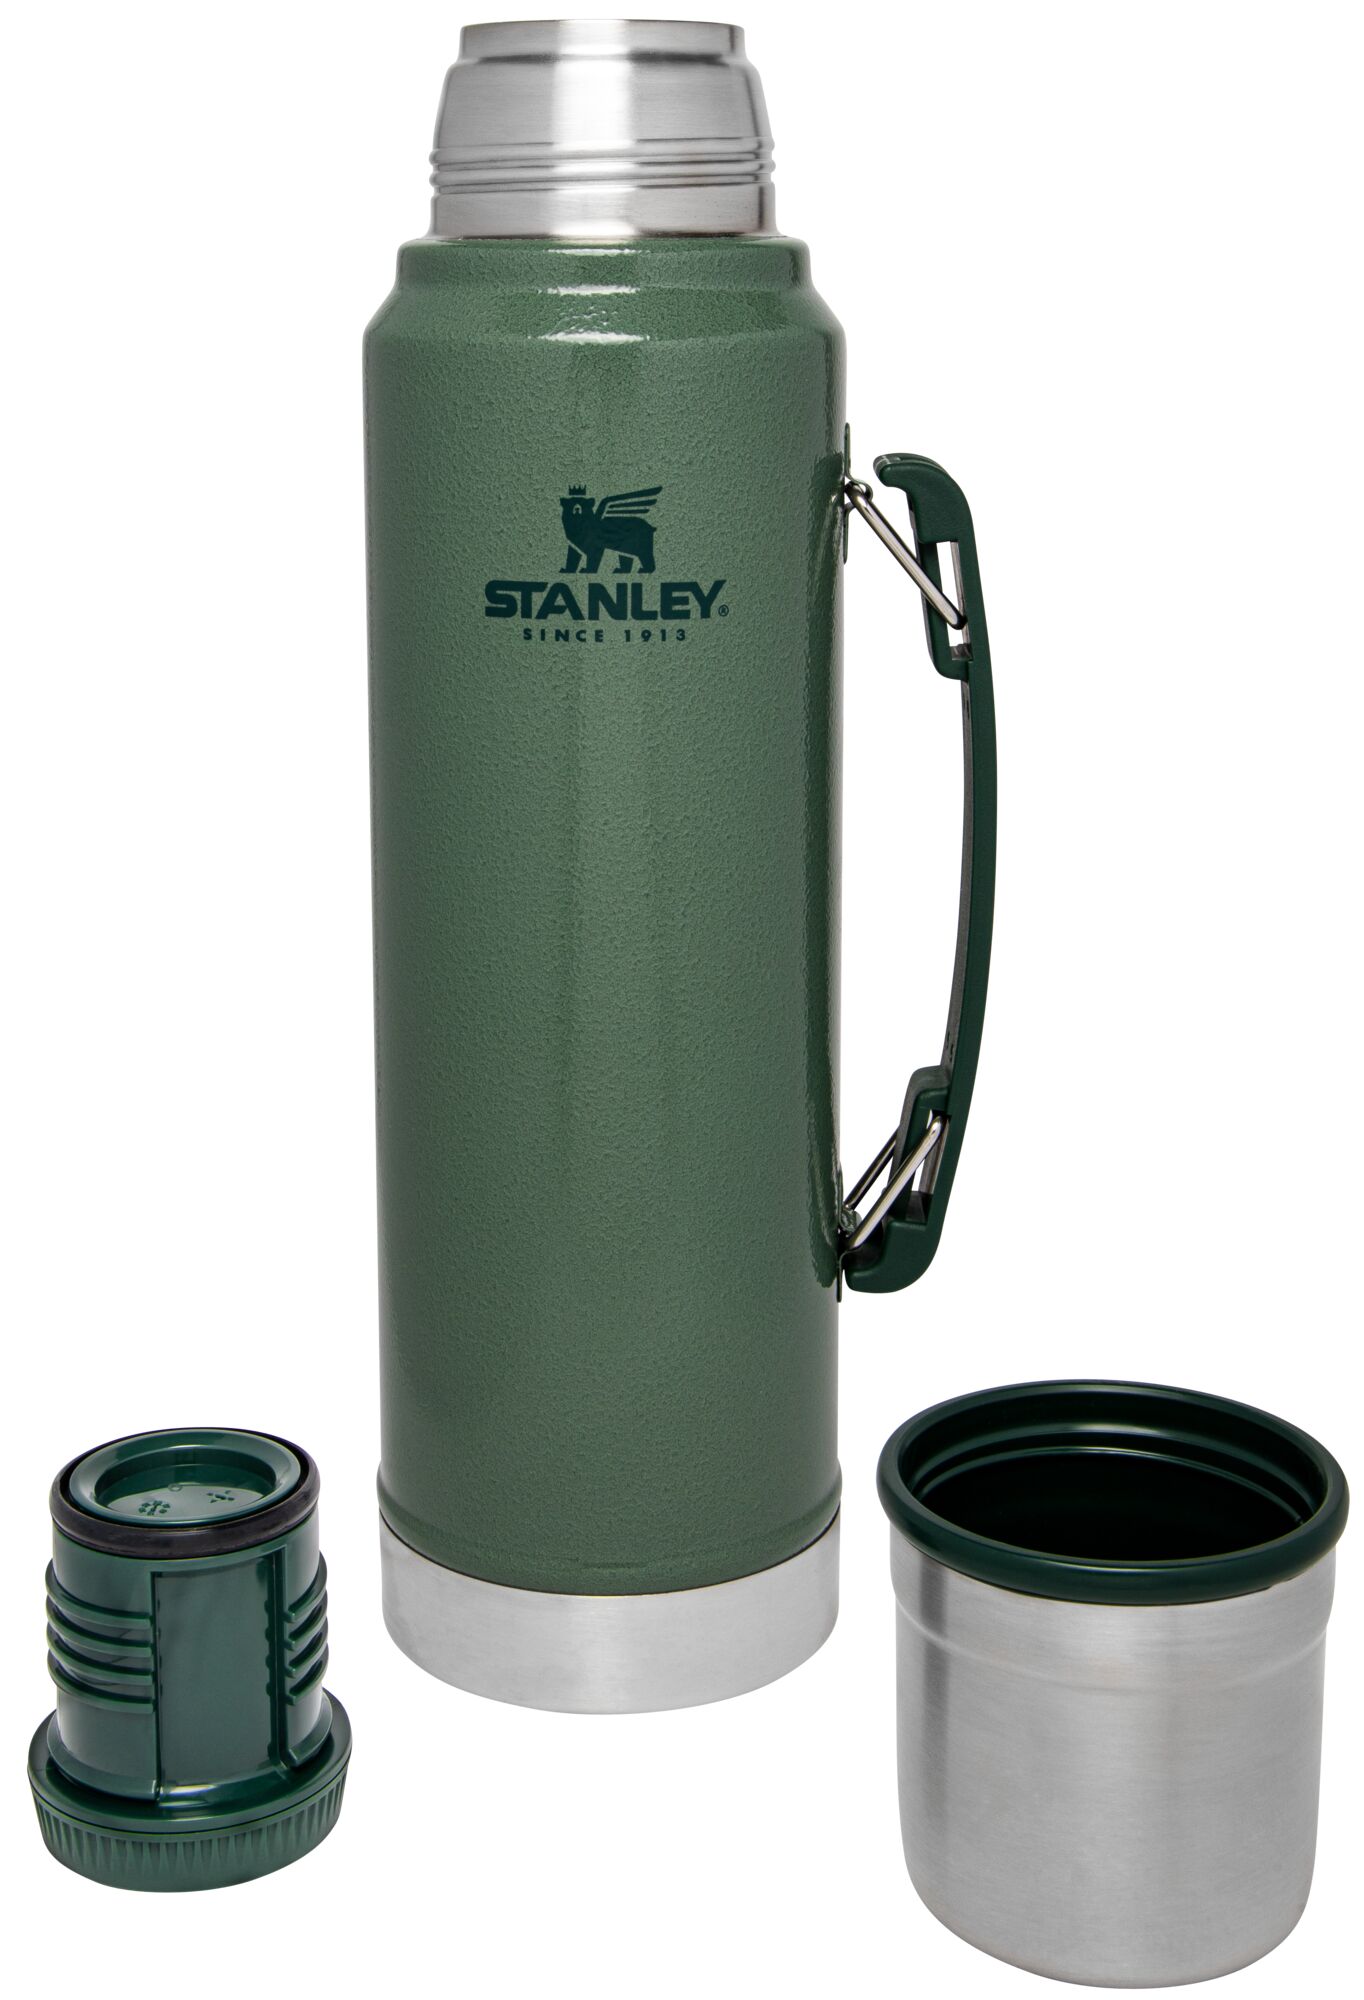 Stanley Classic Stainless Steel Vacuum Insulated Thermos Bottle, 1.1 qt - image 2 of 6